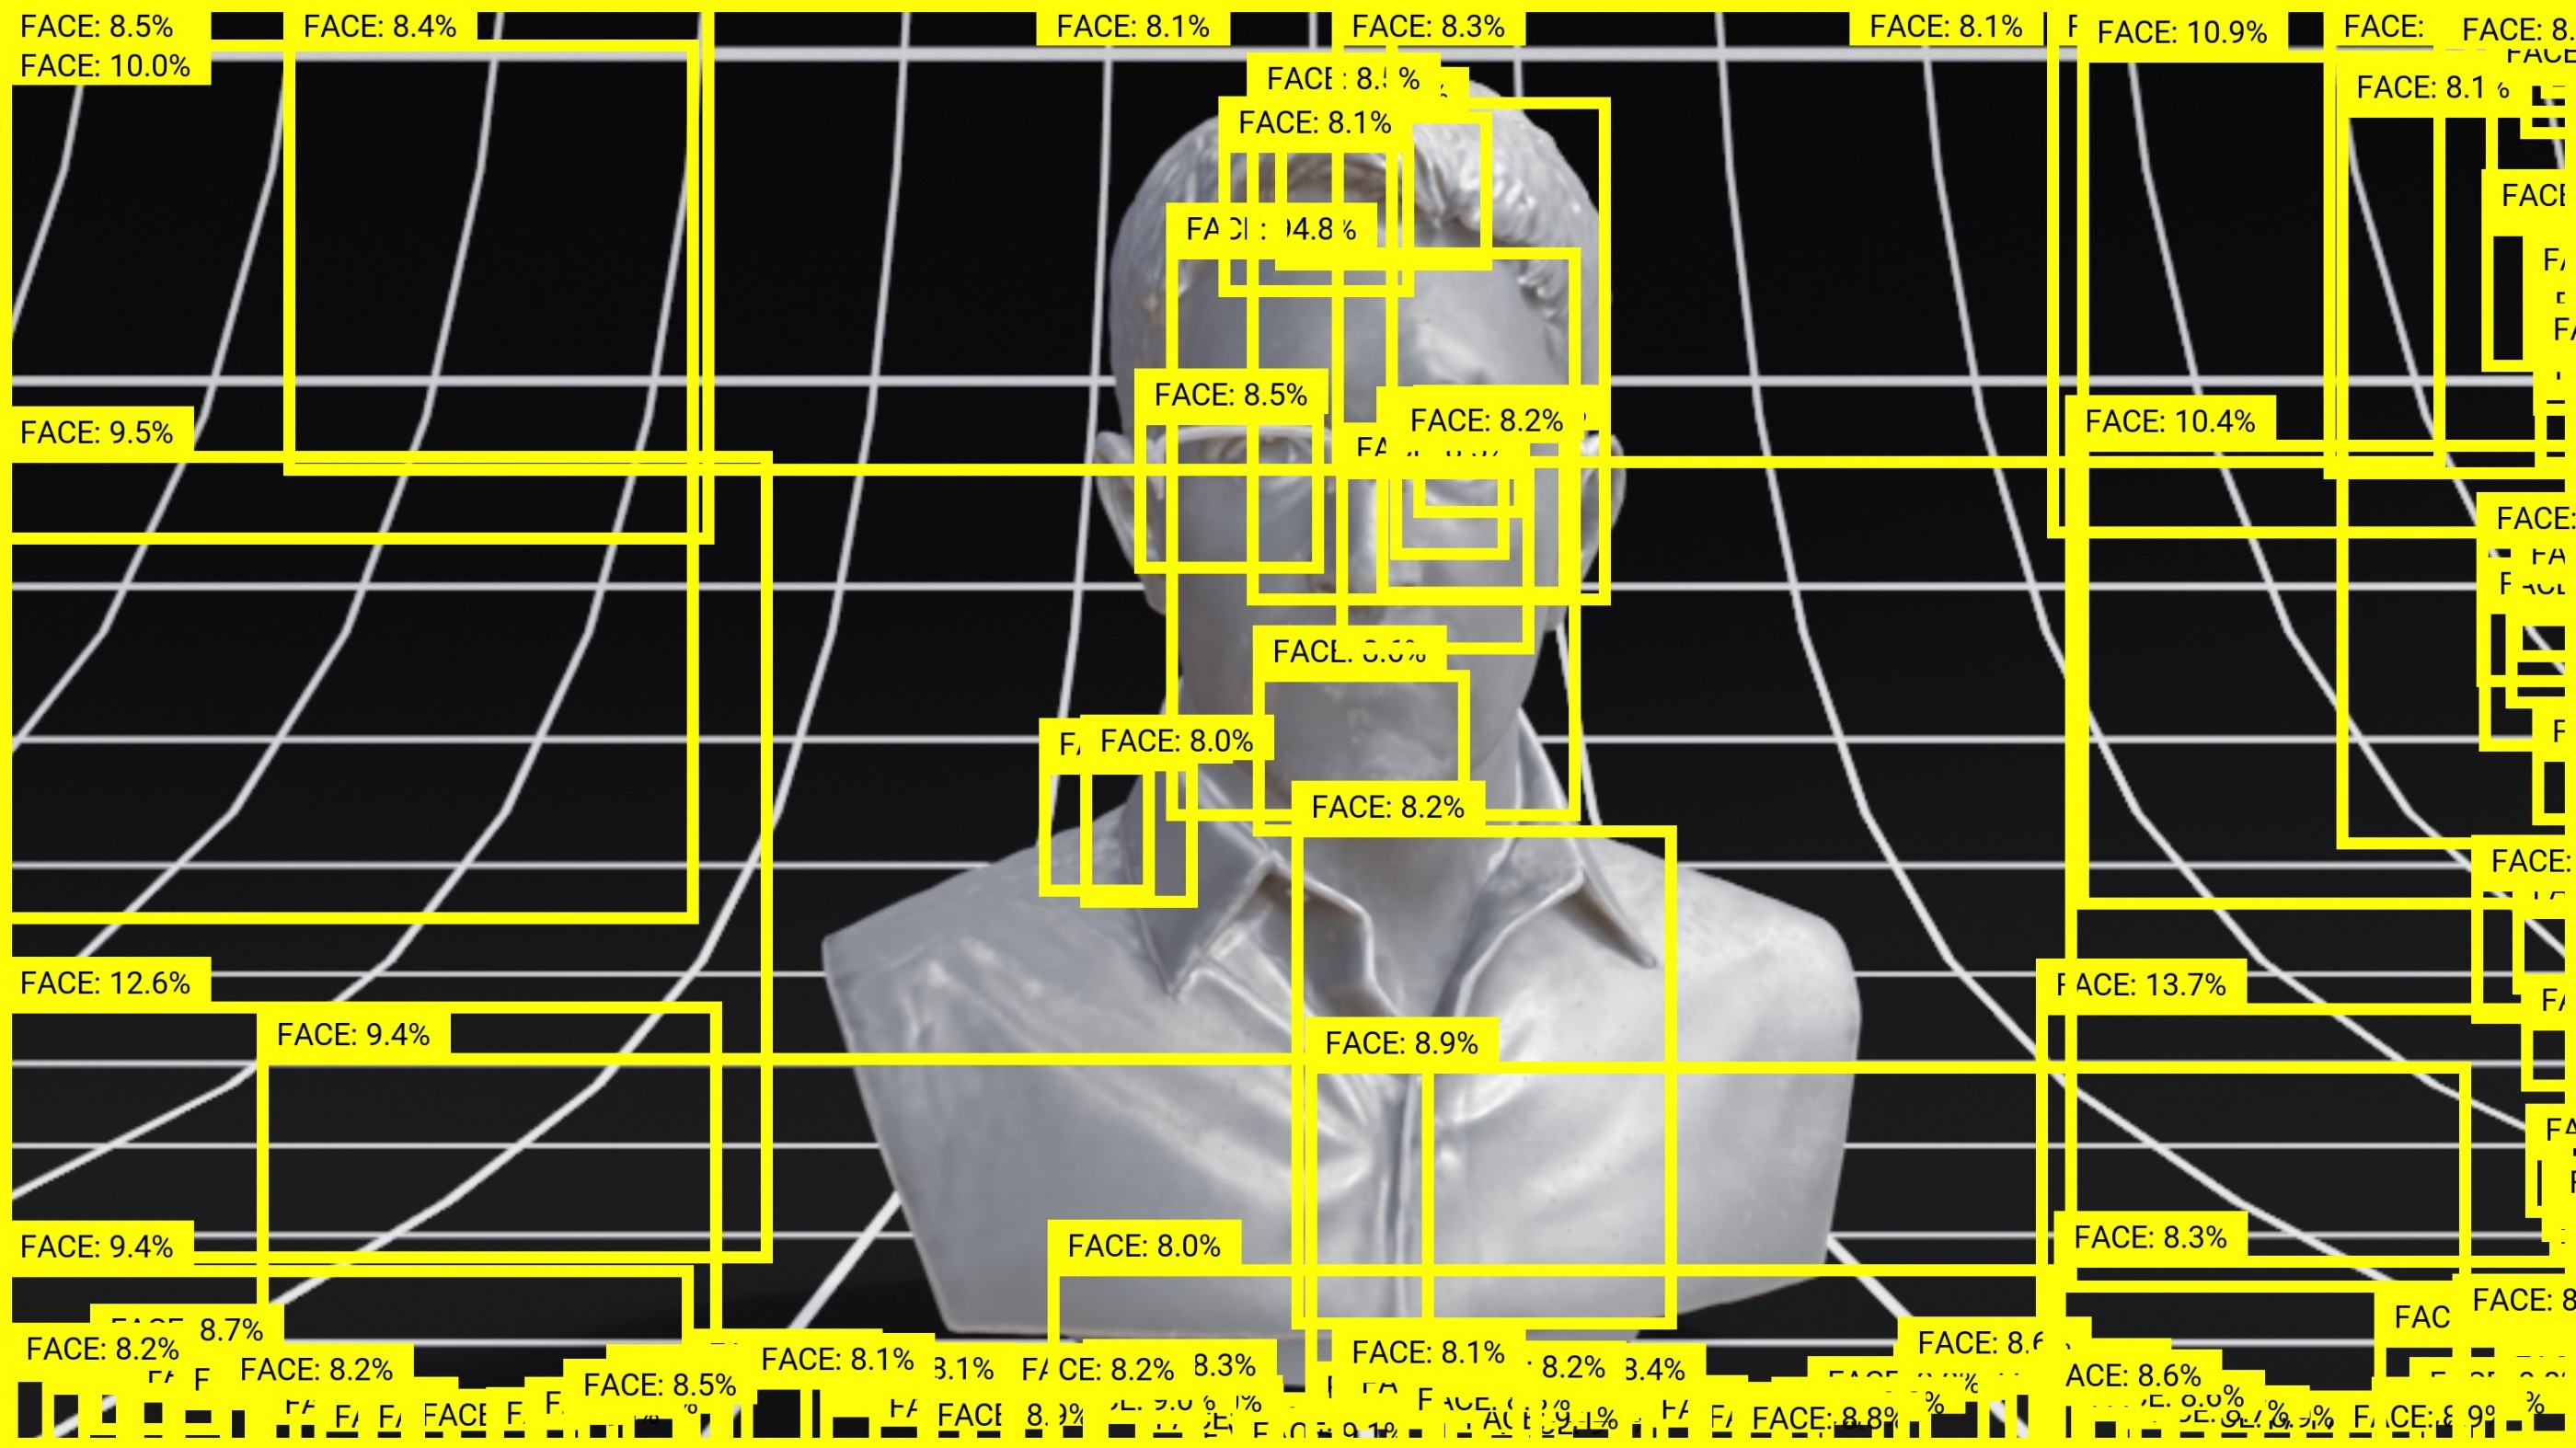 Figure 2: Face detection with 0% thresholding using a Single Shot Detector (SSD) face detection neural network. There is no truth face detection, only probabilities and thresholds. Created using VFRAME computer vision toolkit. Image: © Adam Harvey 2021